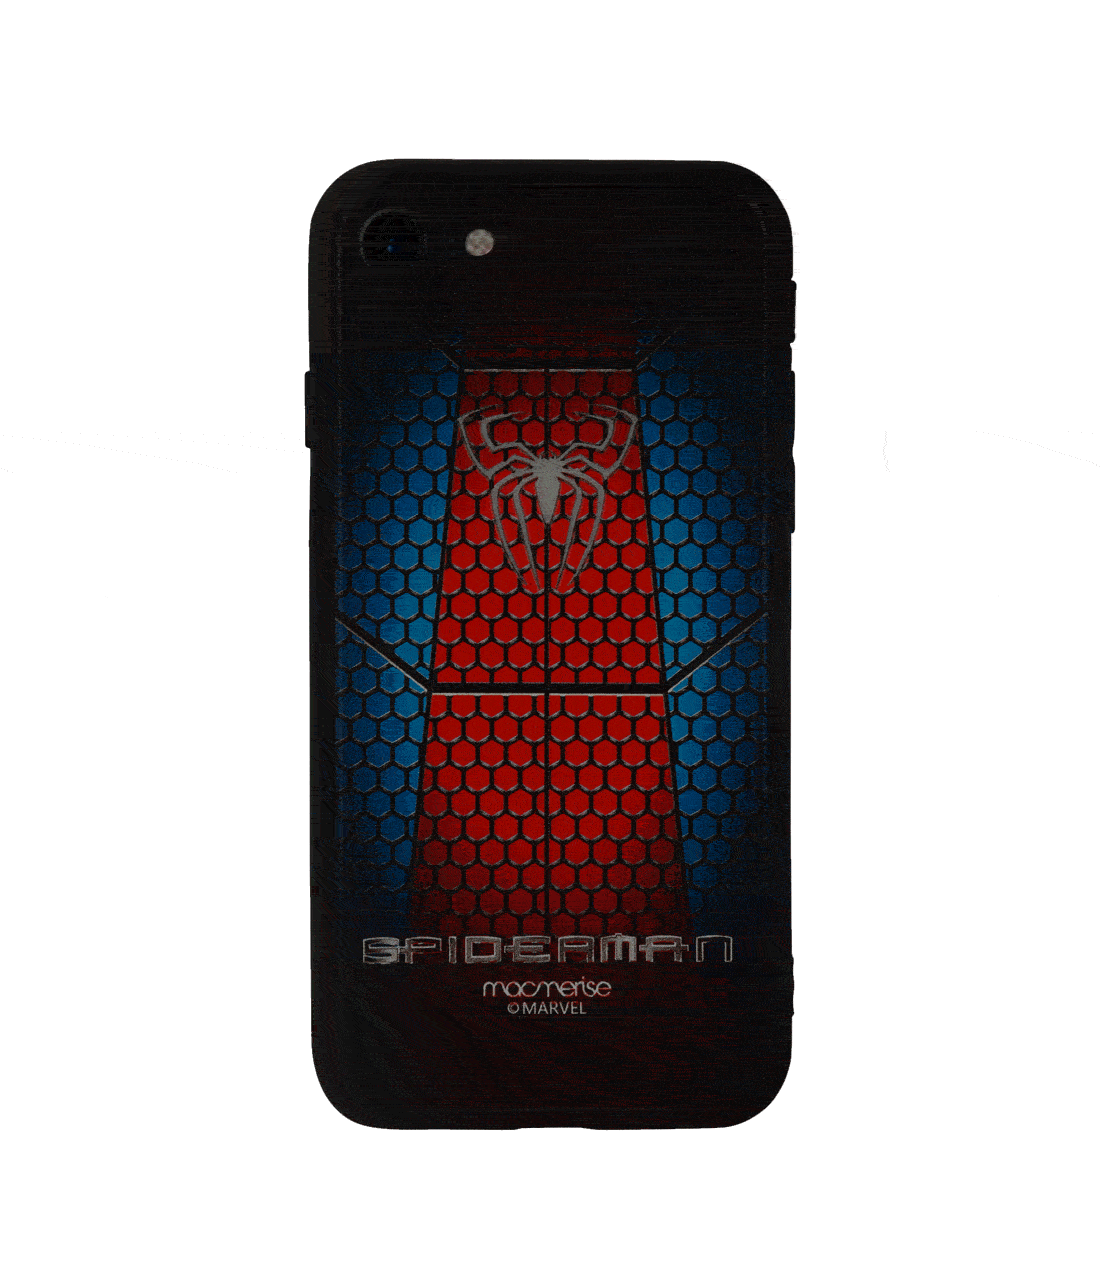 Spider Web Suit - Lumous LED Phone Case for iPhone 8